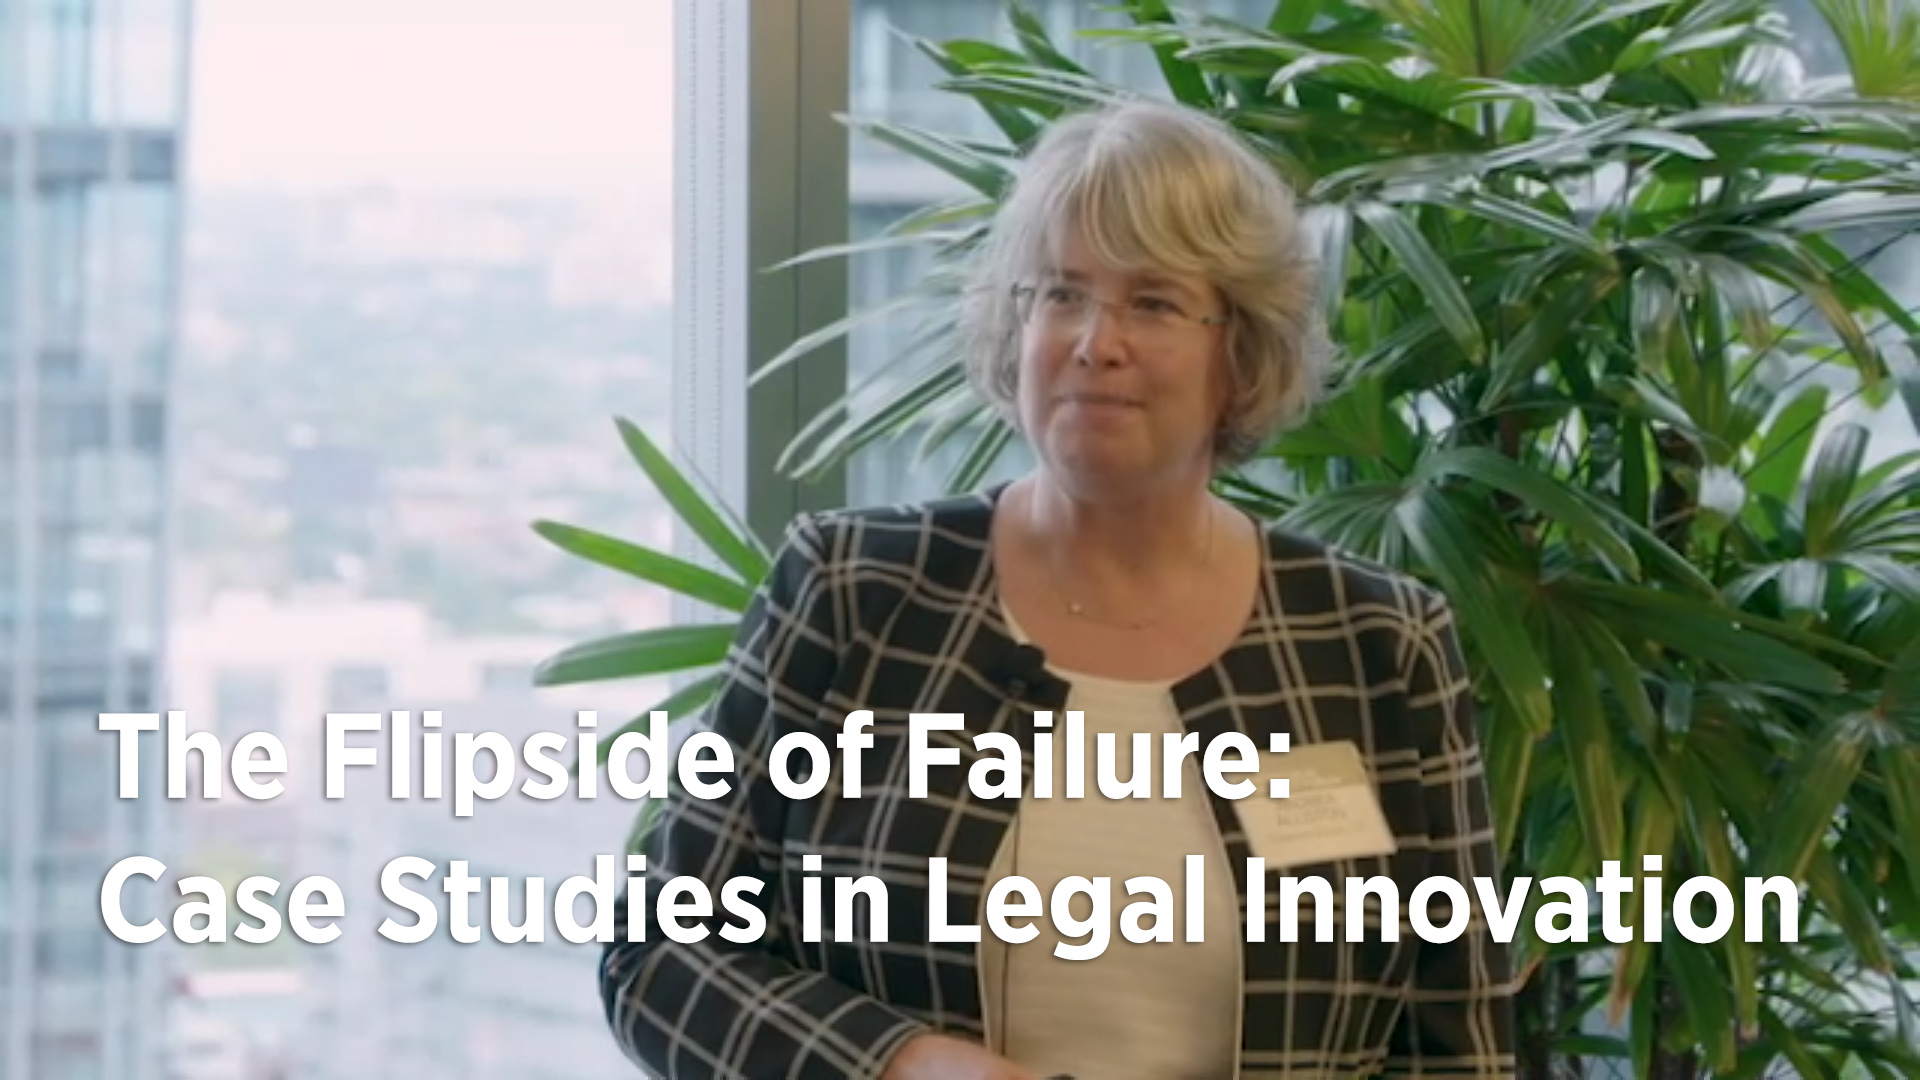 The Flipside of Failure: Case Studies in Legal Innovation